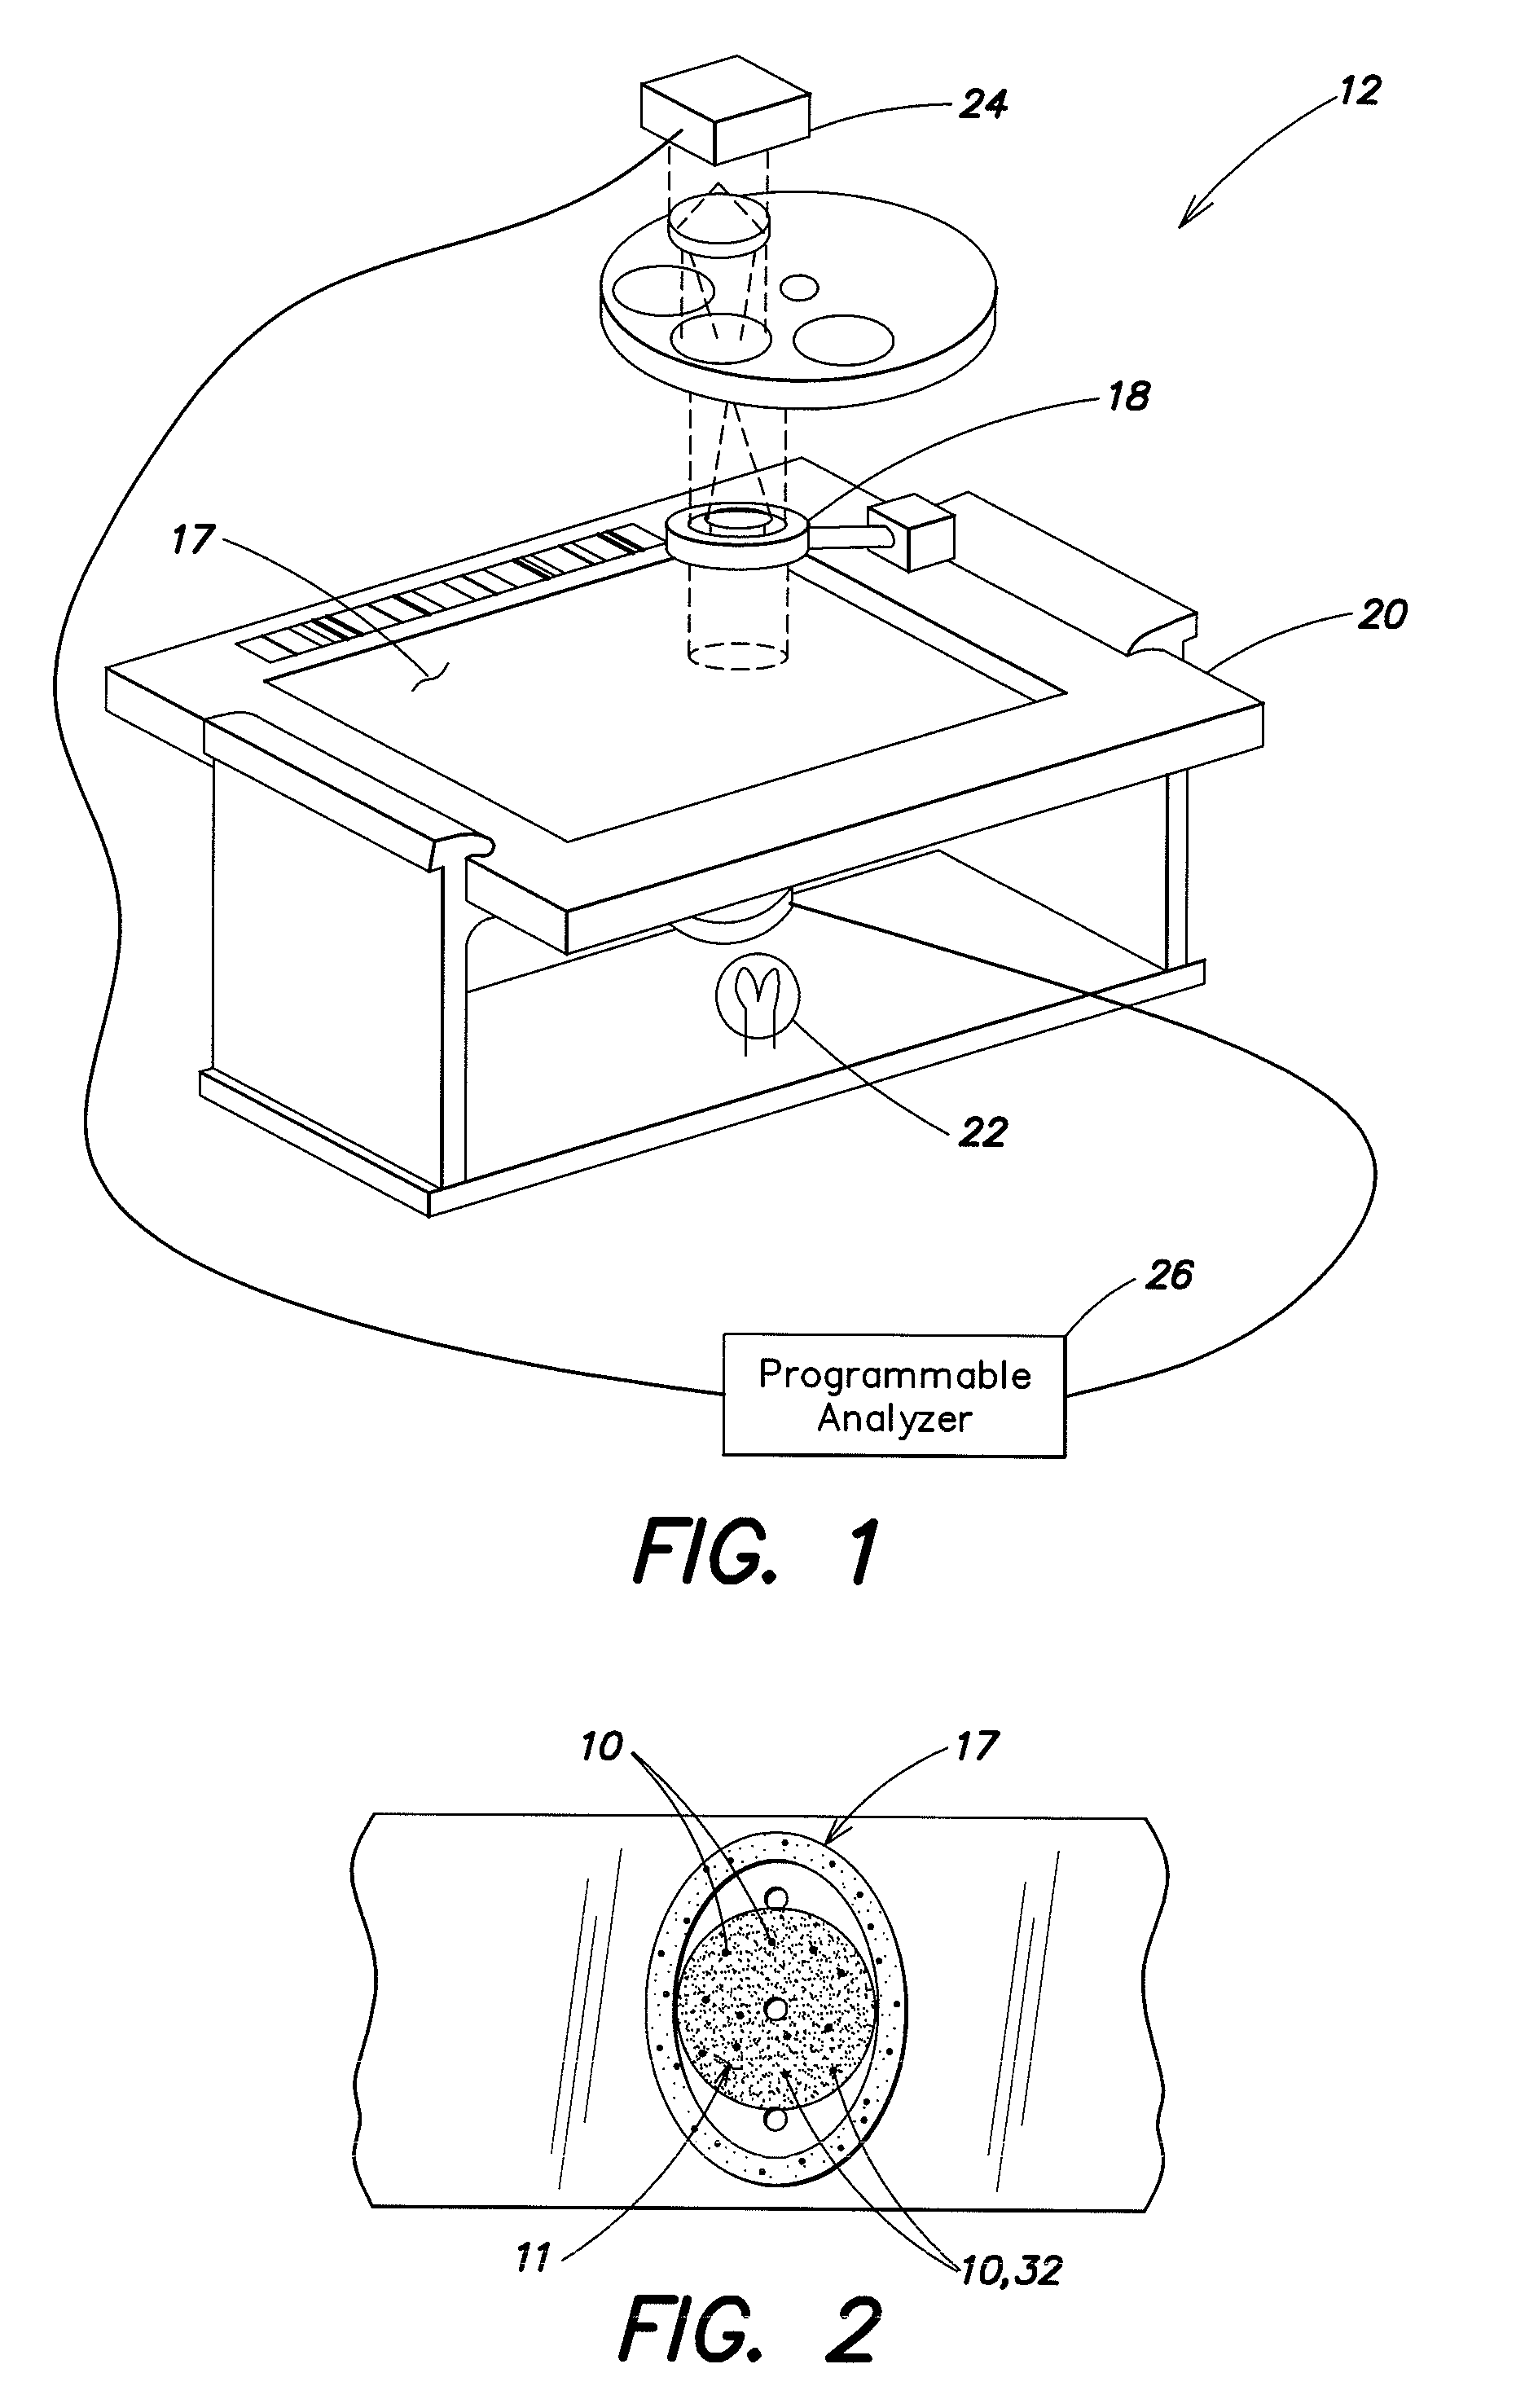 Method and apparatus for determining a focal position of an imaging device adapted to image a biologic sample